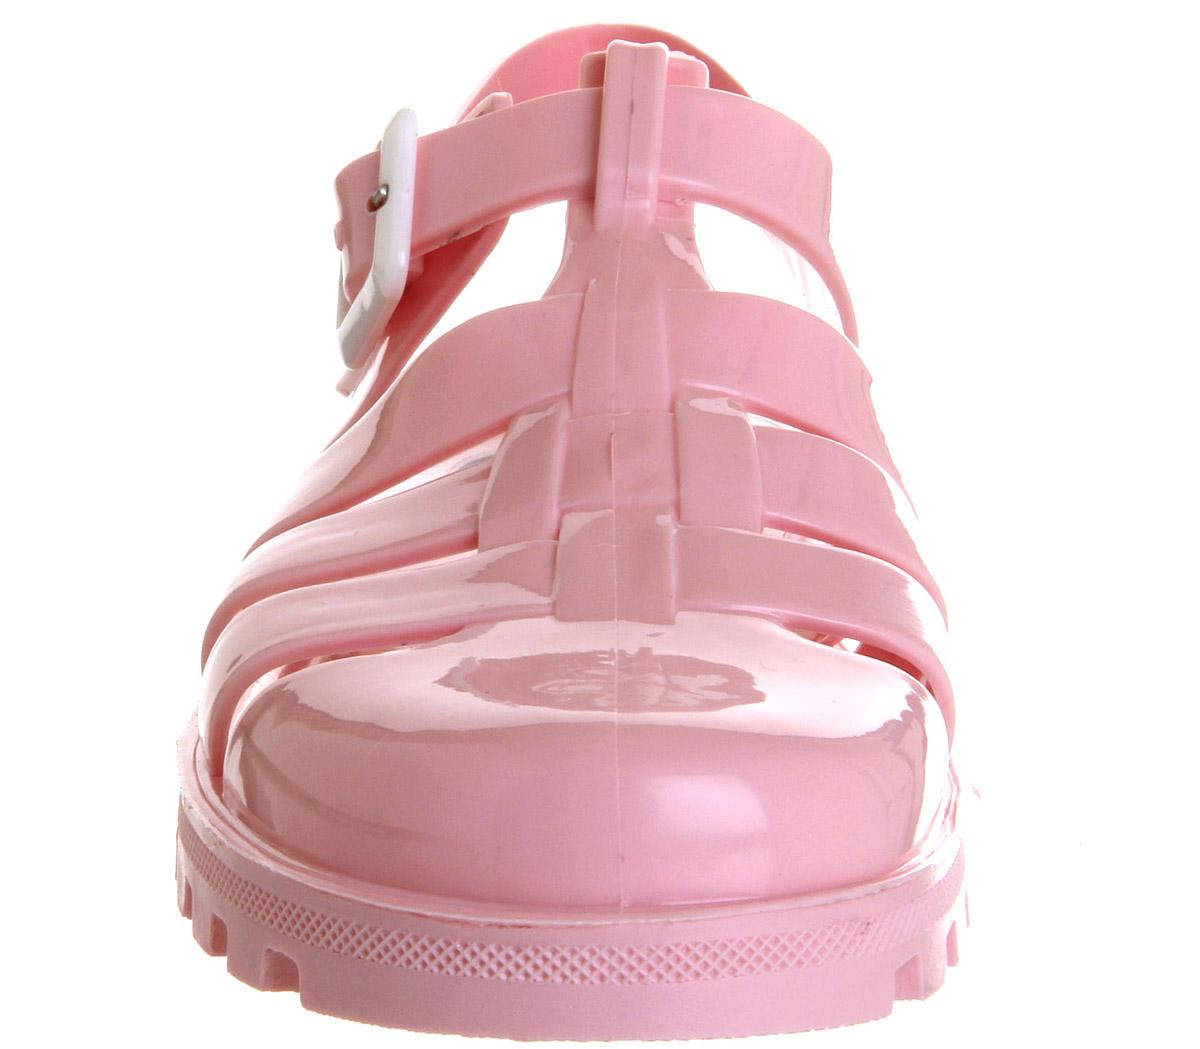 JuJu Maxi Low Jelly Shoes Pale Pink - Sandals